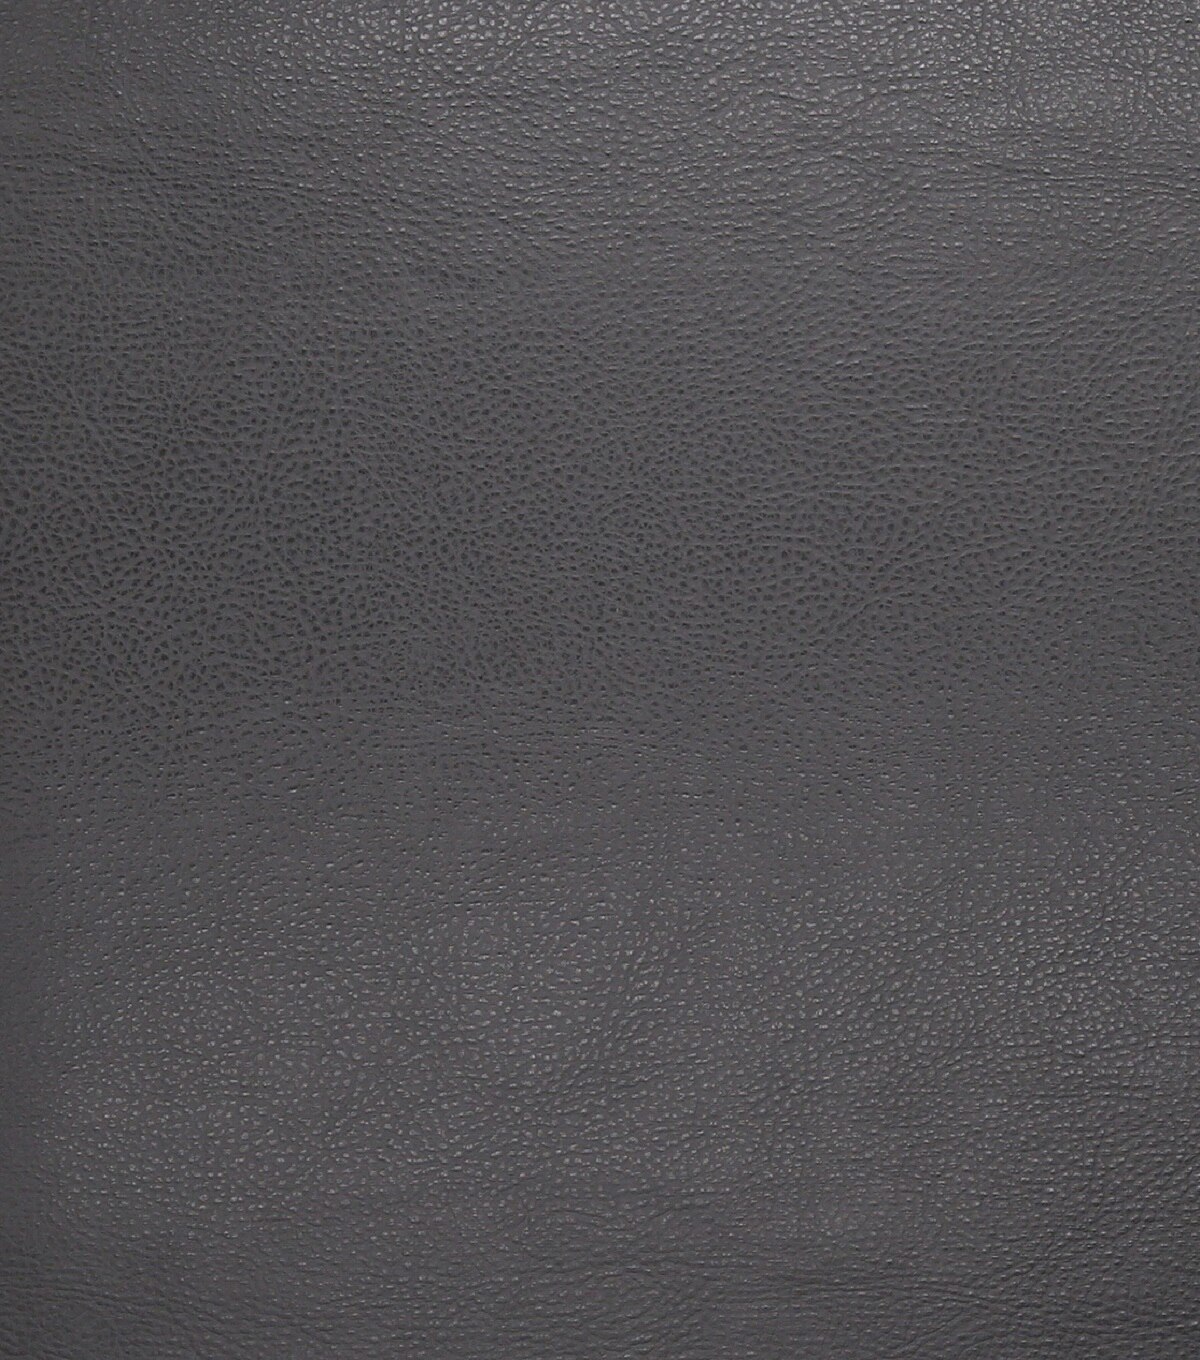 where to buy pleather material